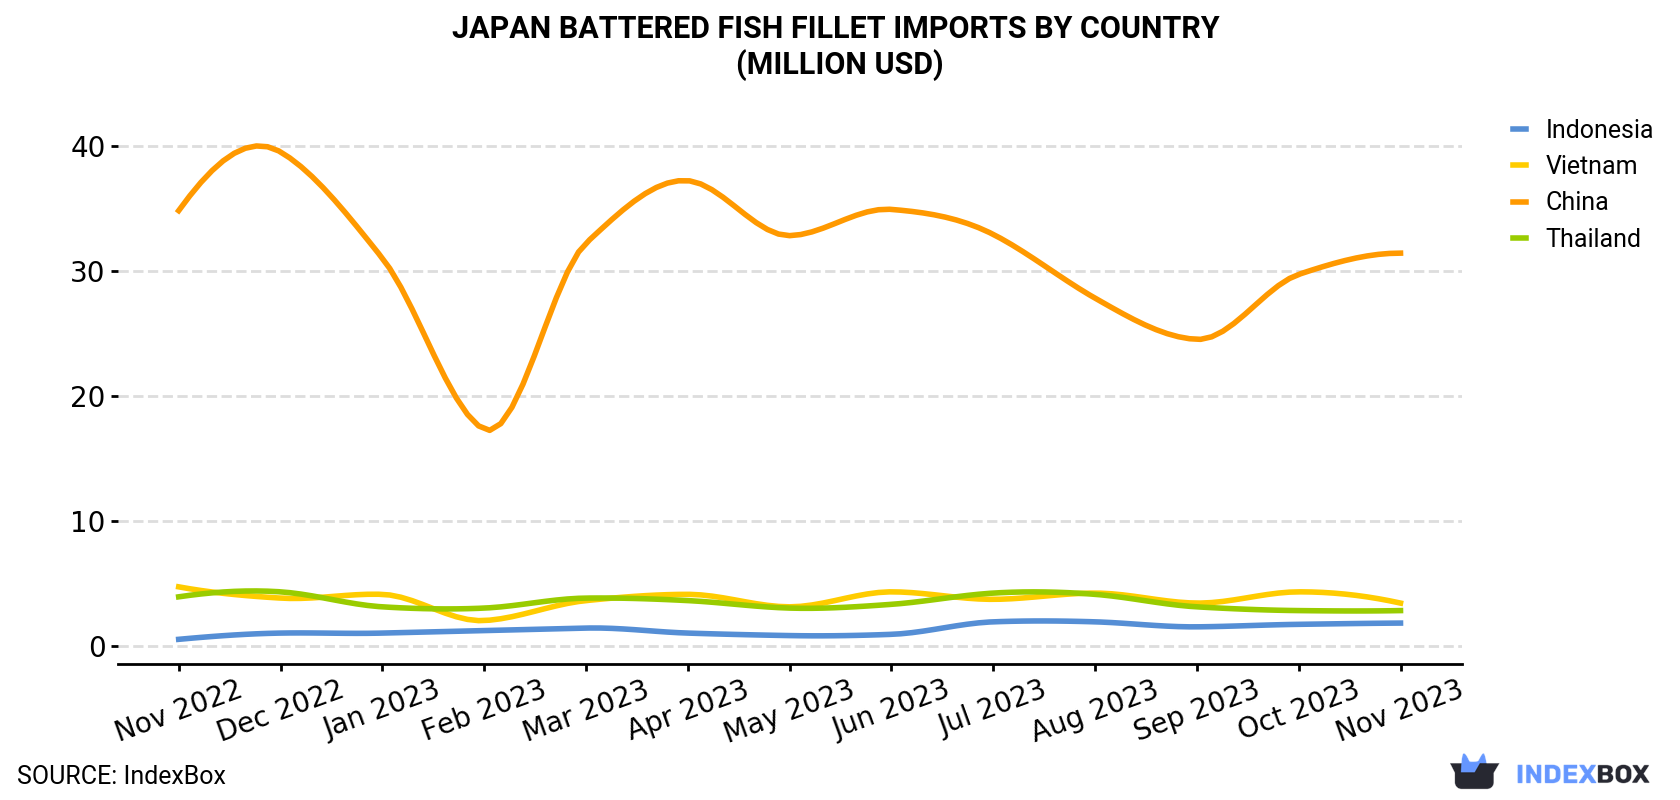 Japan Battered Fish Fillet Imports By Country (Million USD)